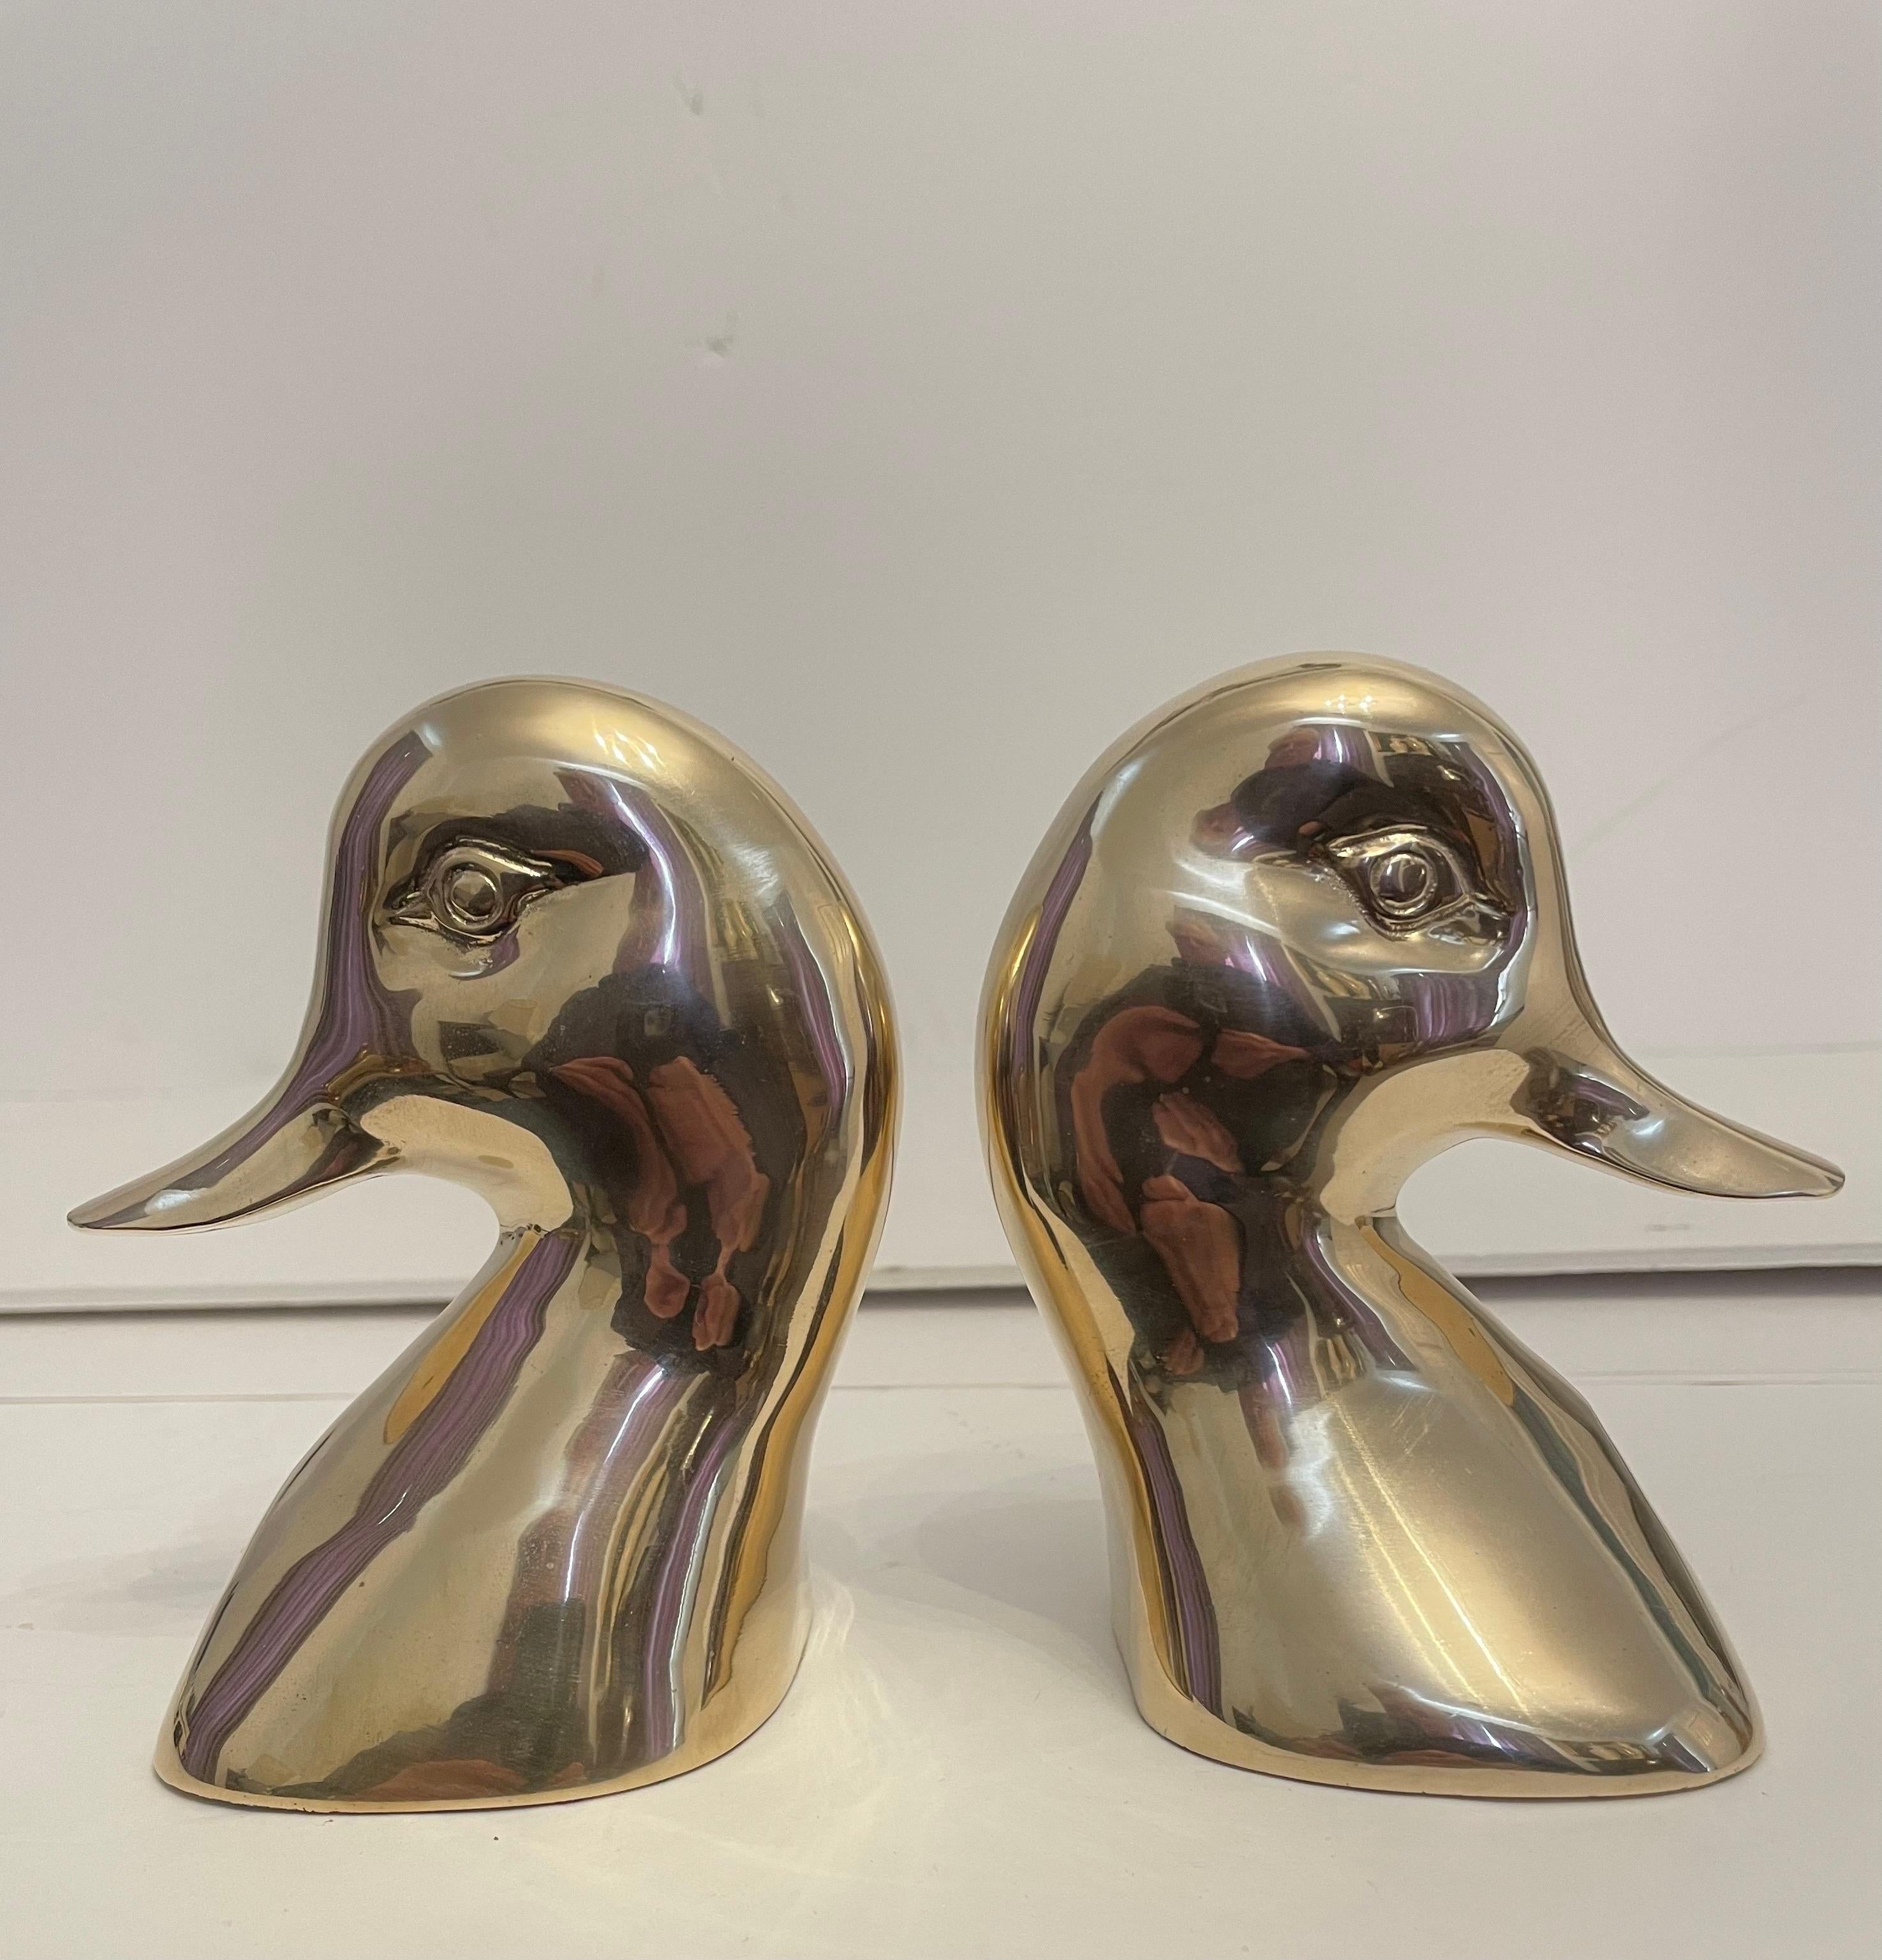 Vintage brass Duck bookends in the style of Virginia Metalcrafters, Good condition. Has nice weight to hold a stack of books. Felt on bottom. Great for your desk or bookshelf. Any light or dark areas are reflection only. Good condition, hand